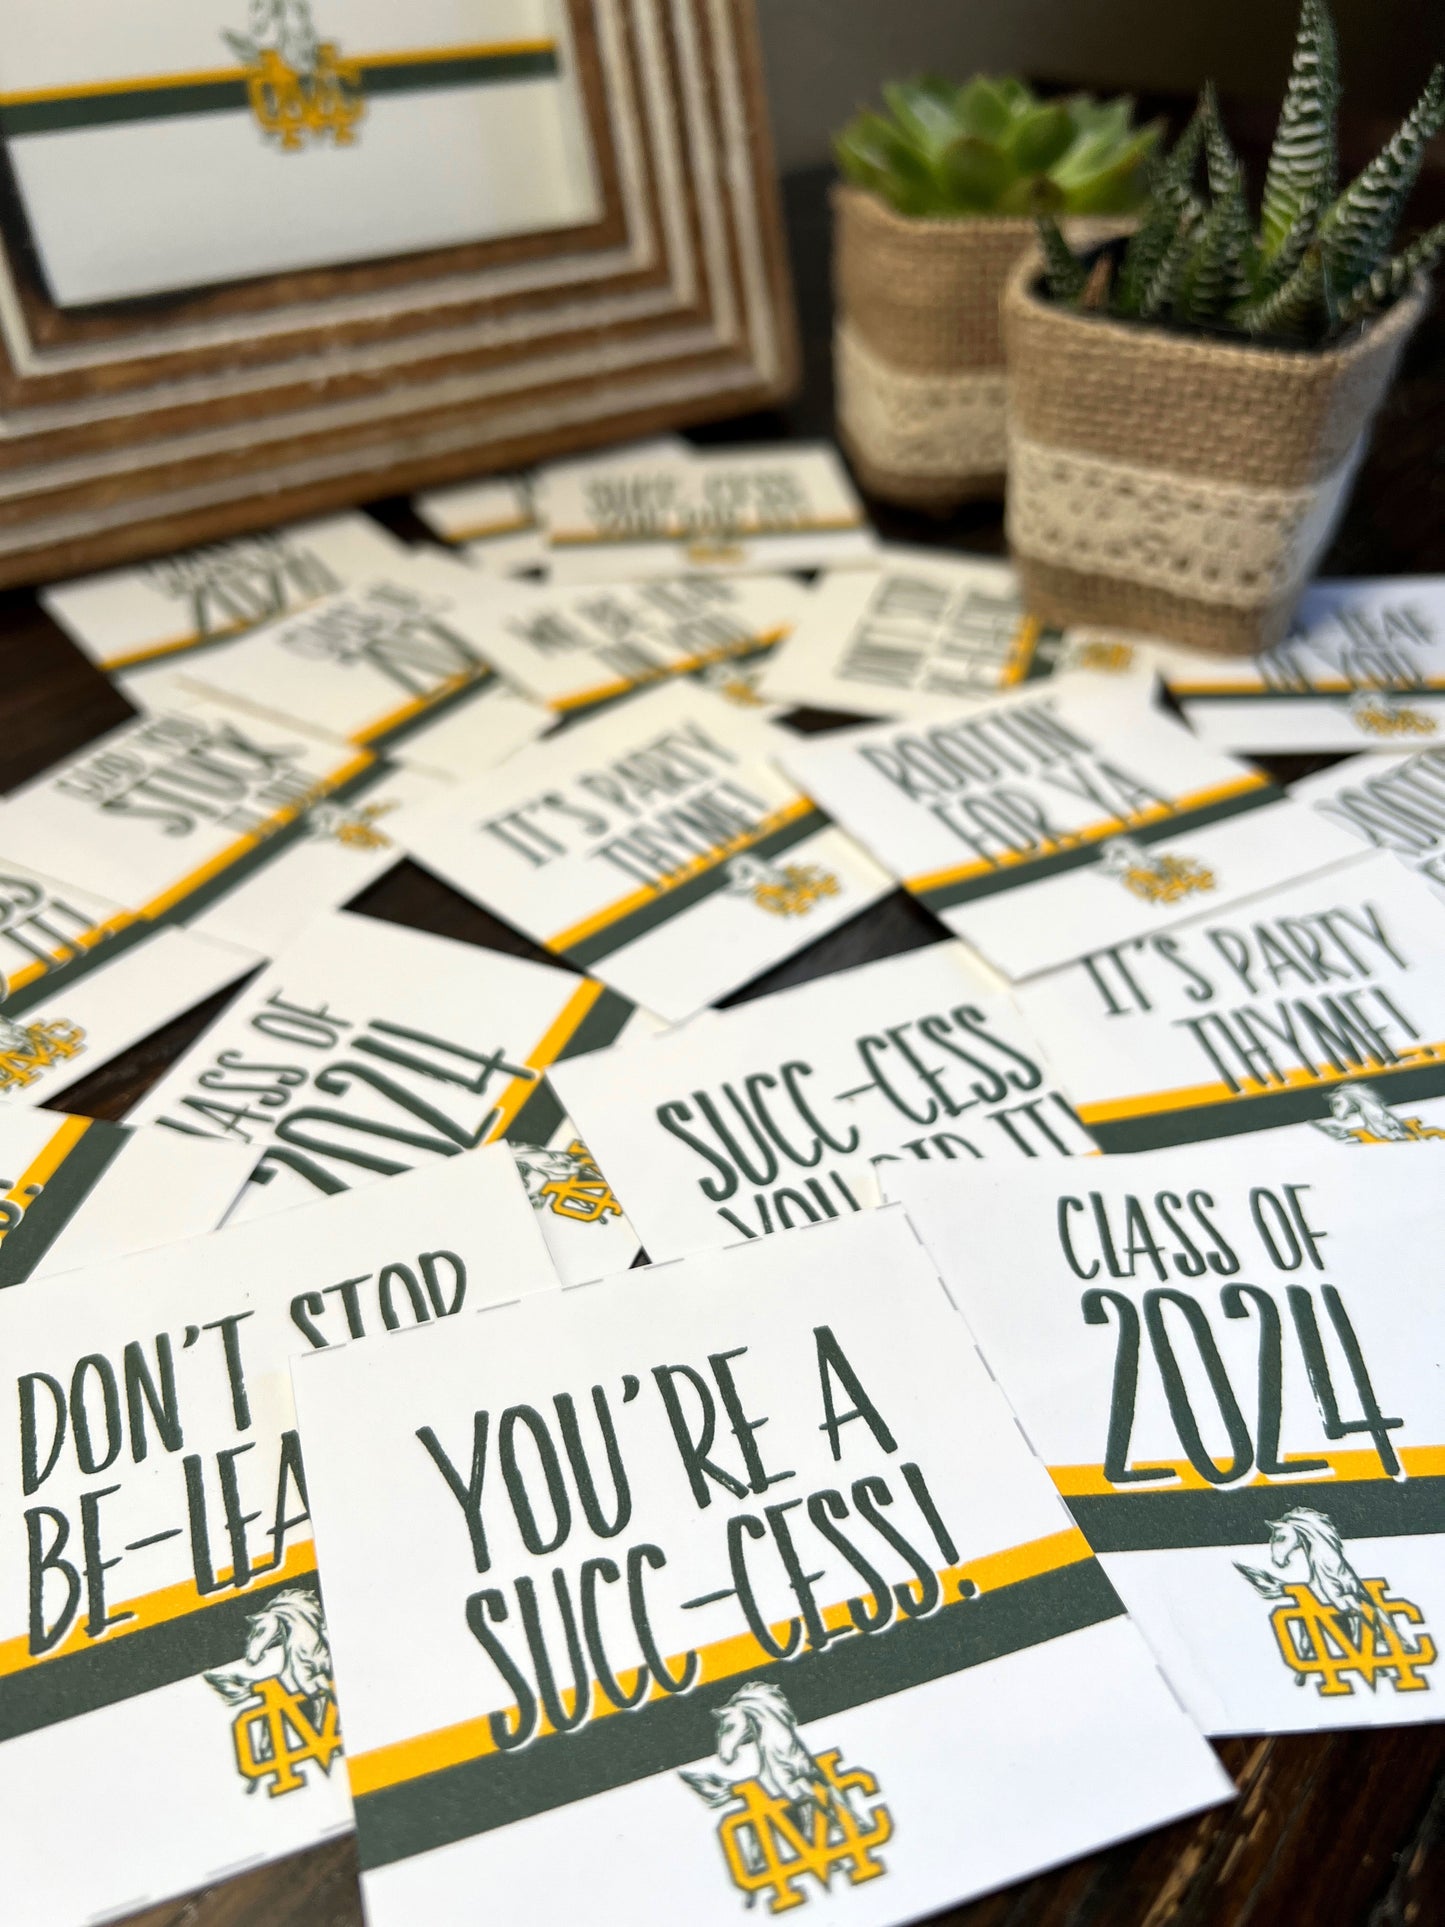 Class of 2024 Grad Tags, MCHS, Funny Graduation Party Favor Tags, Plant Puns, Mira Costa High School, Printable